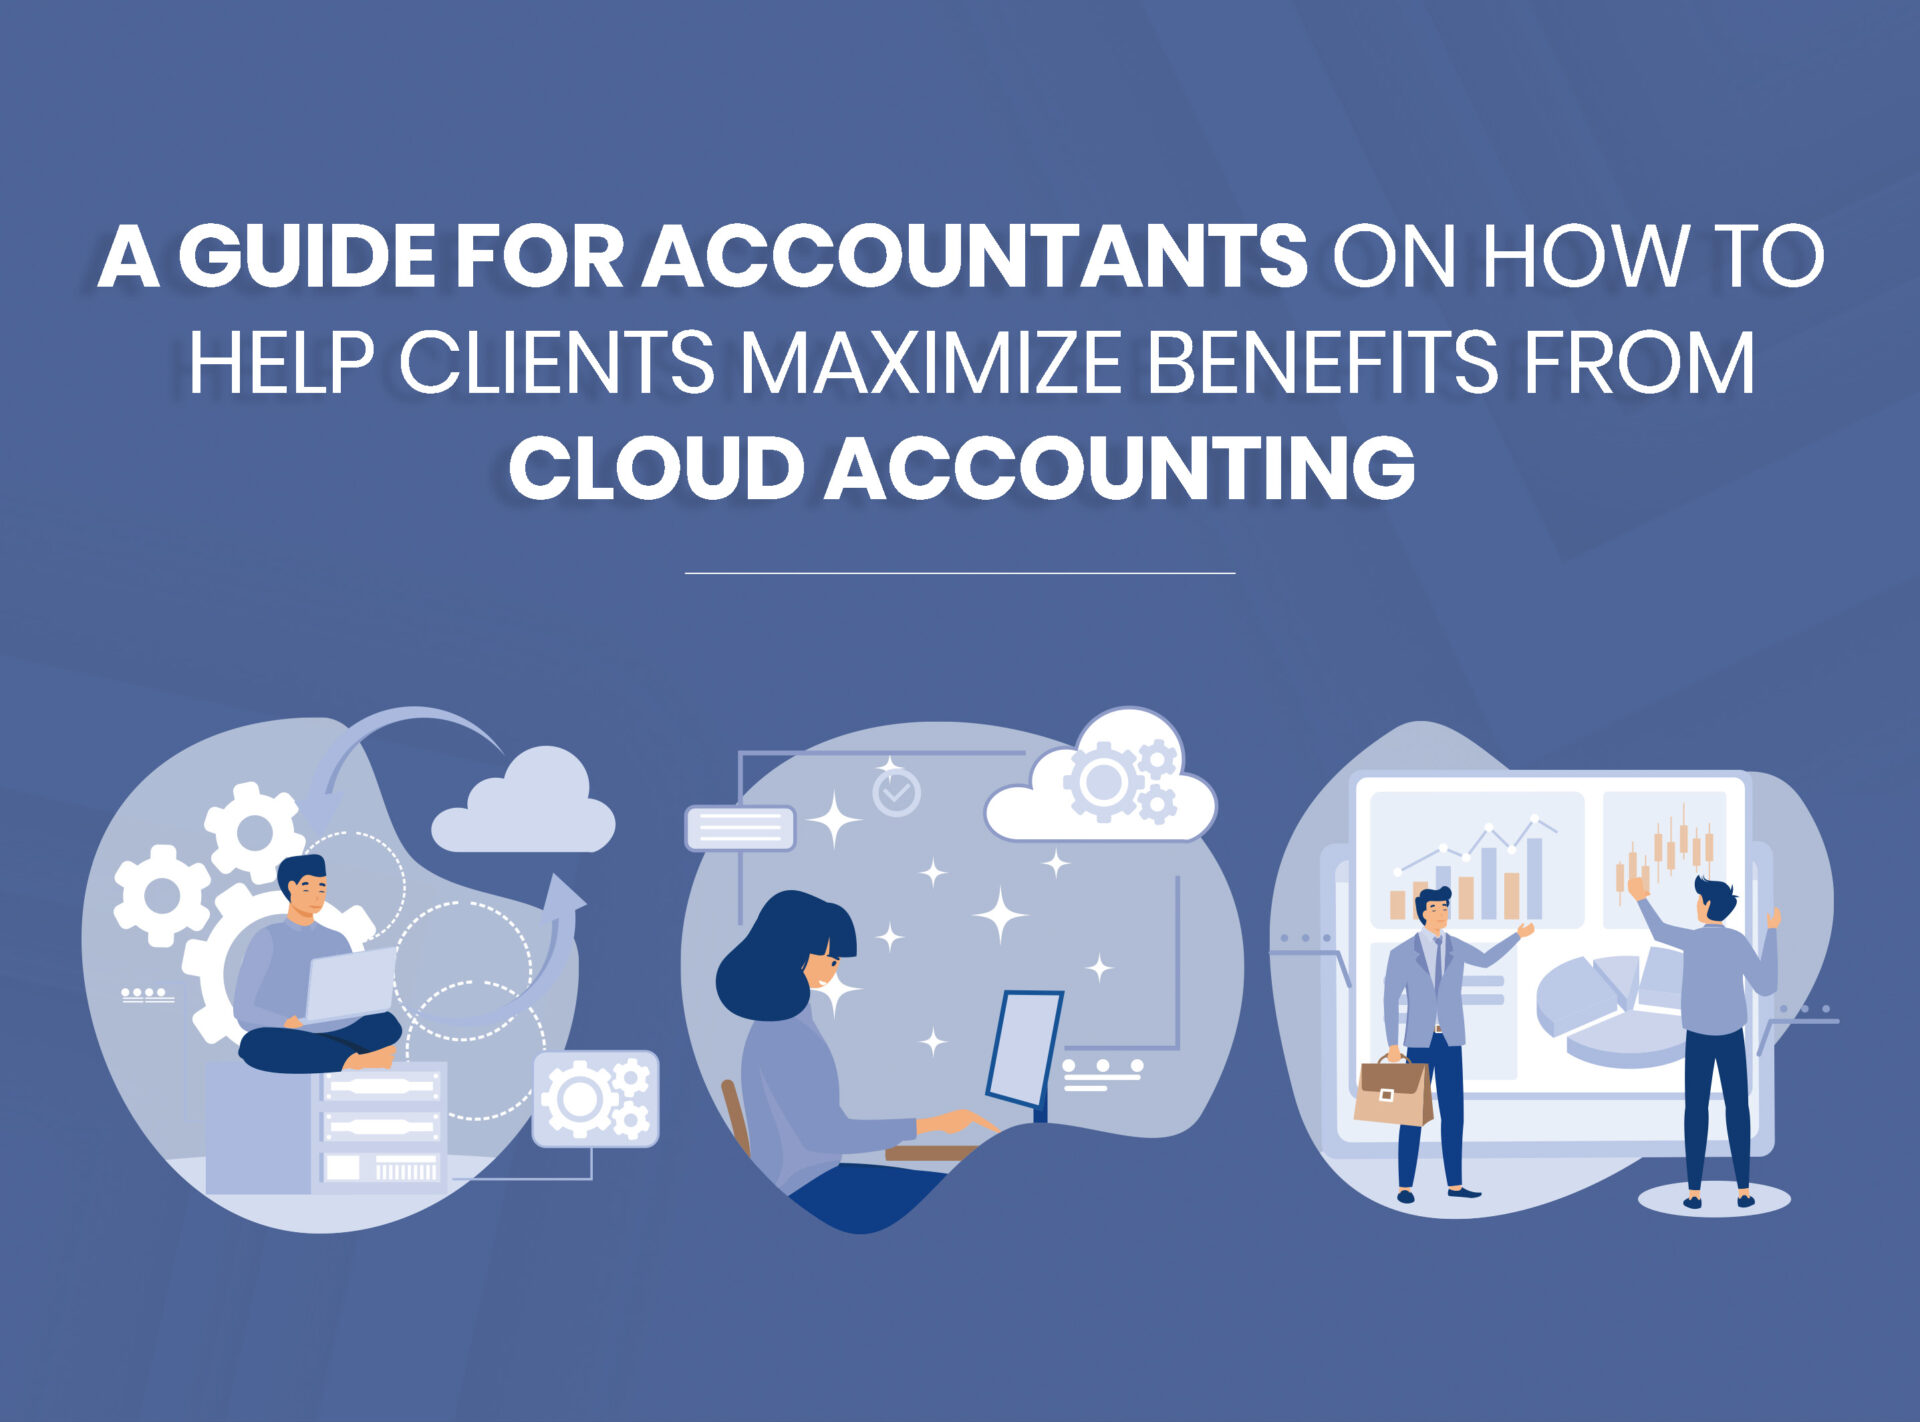 A Guide for Accountants on How to Help Clients Maximize Benefits from Cloud Accounting